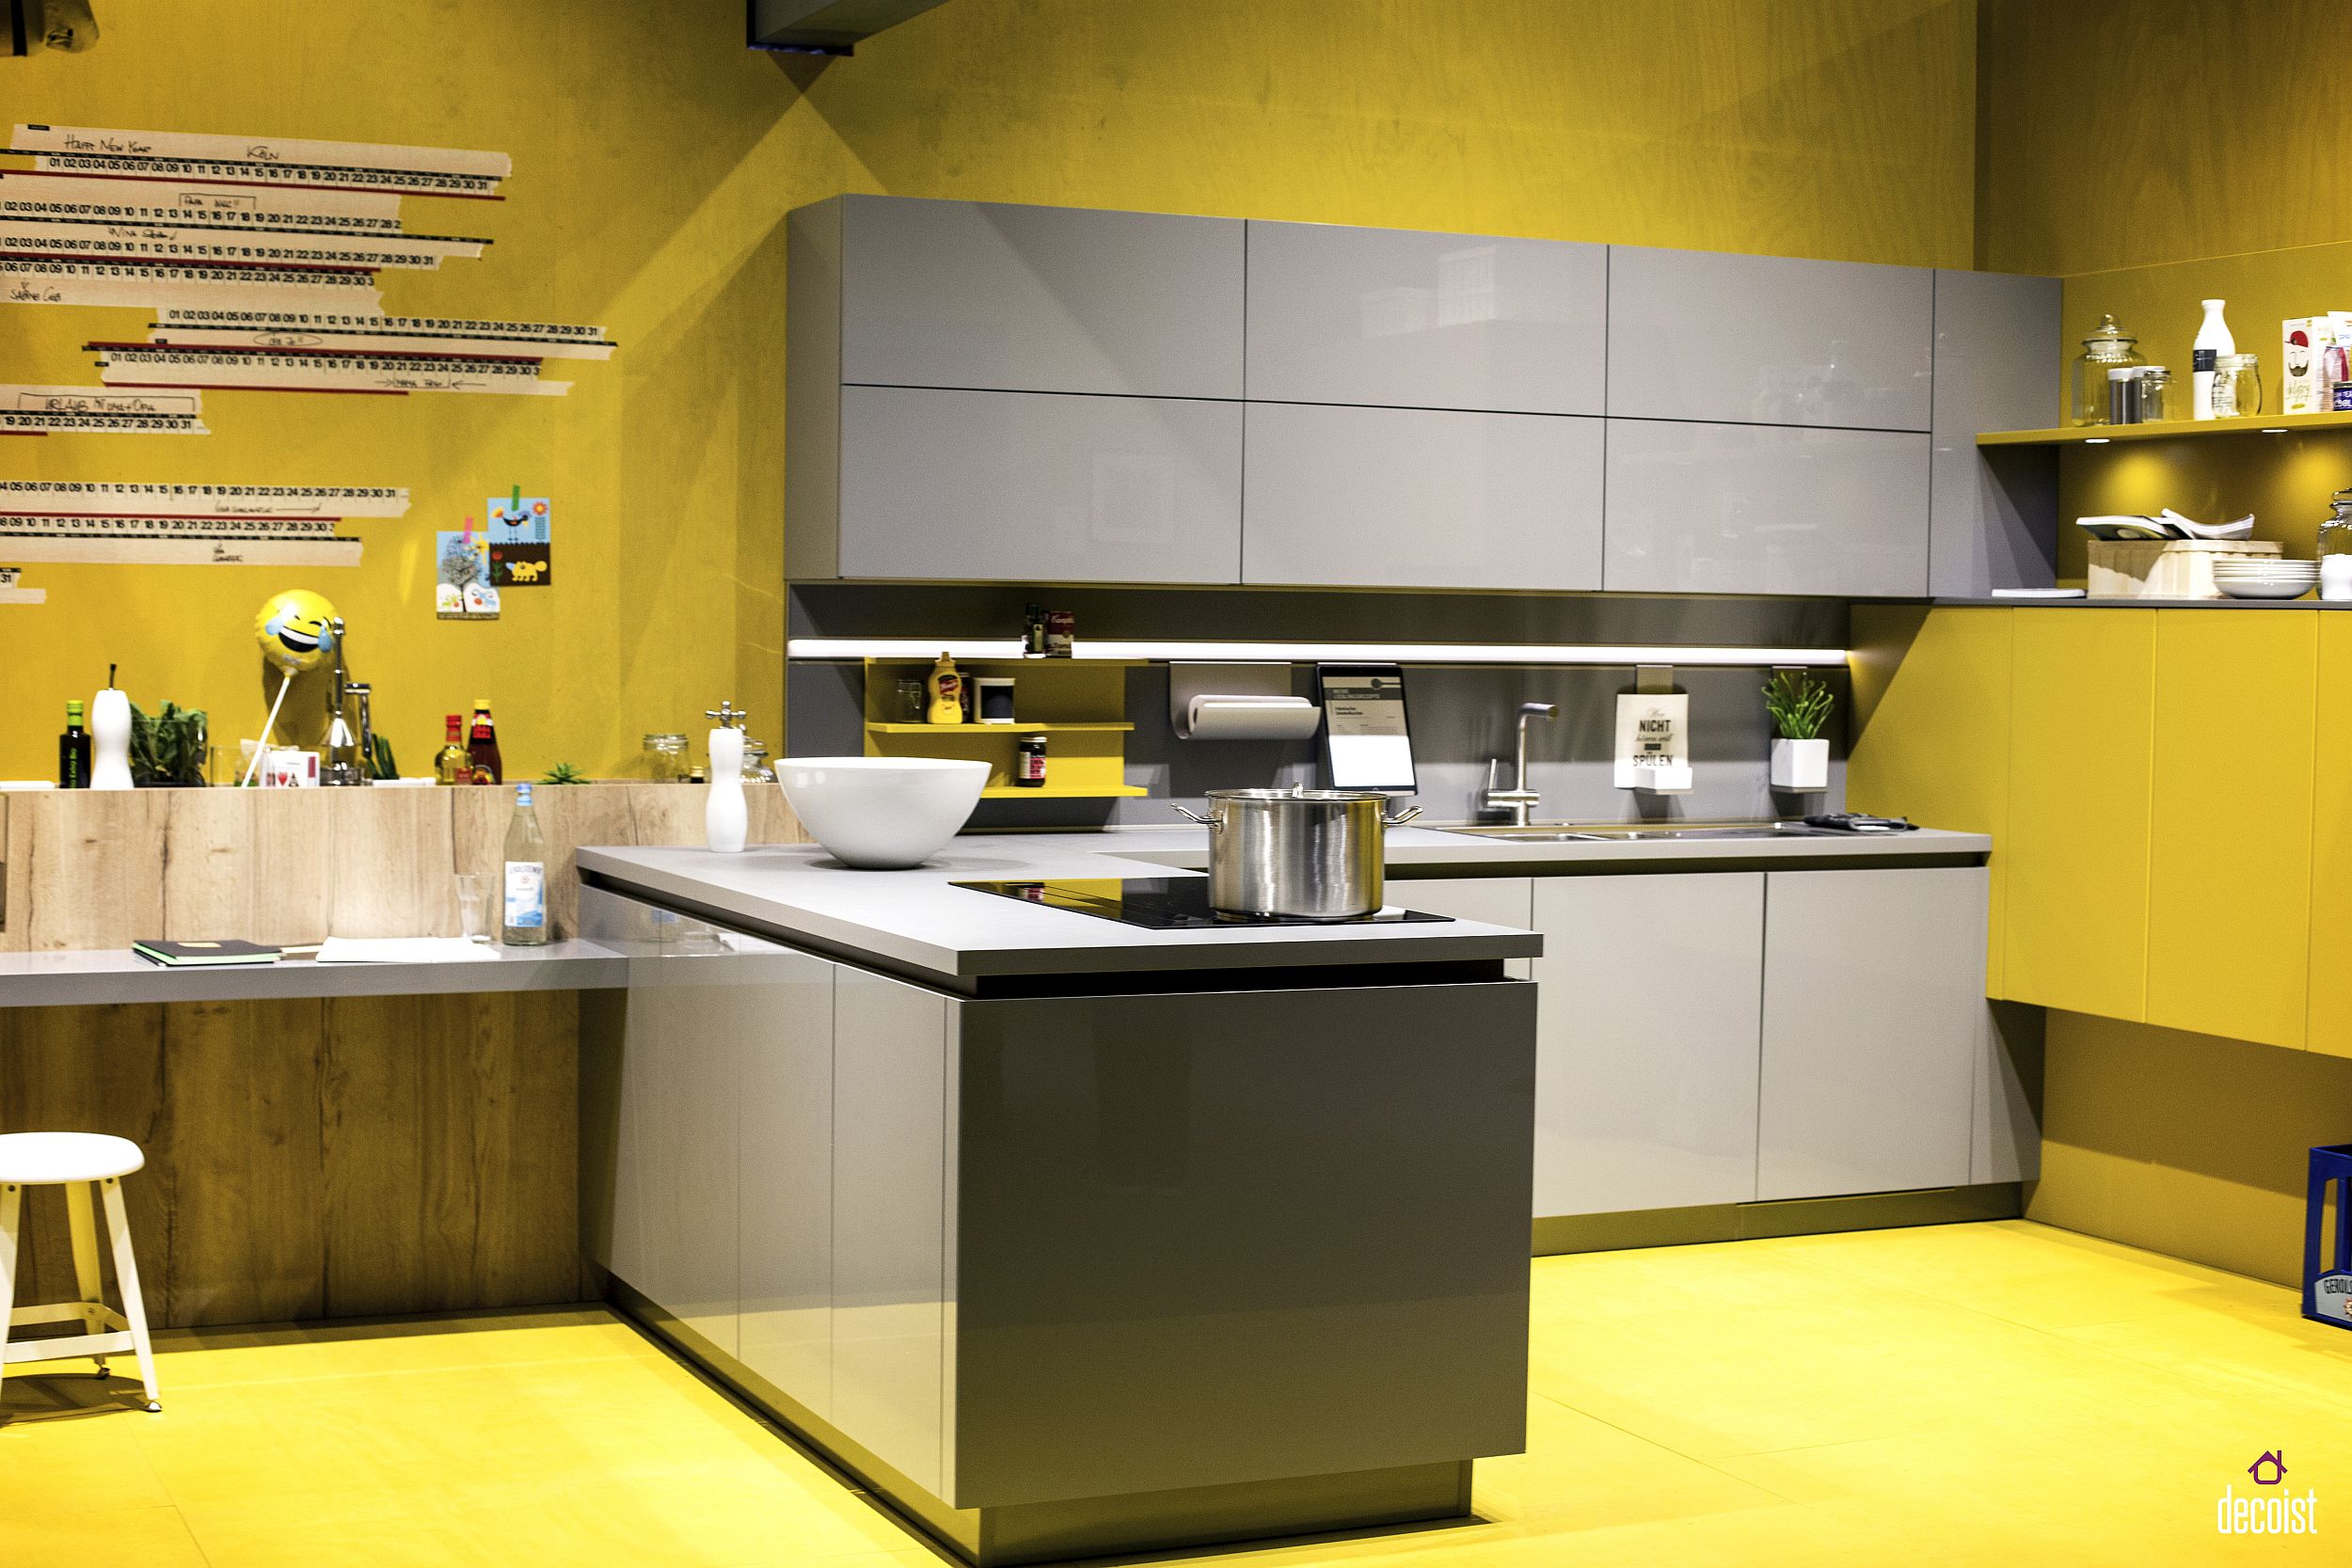 Cheerful-kitchen-in-yellow-and-gray-with-modular-shelving